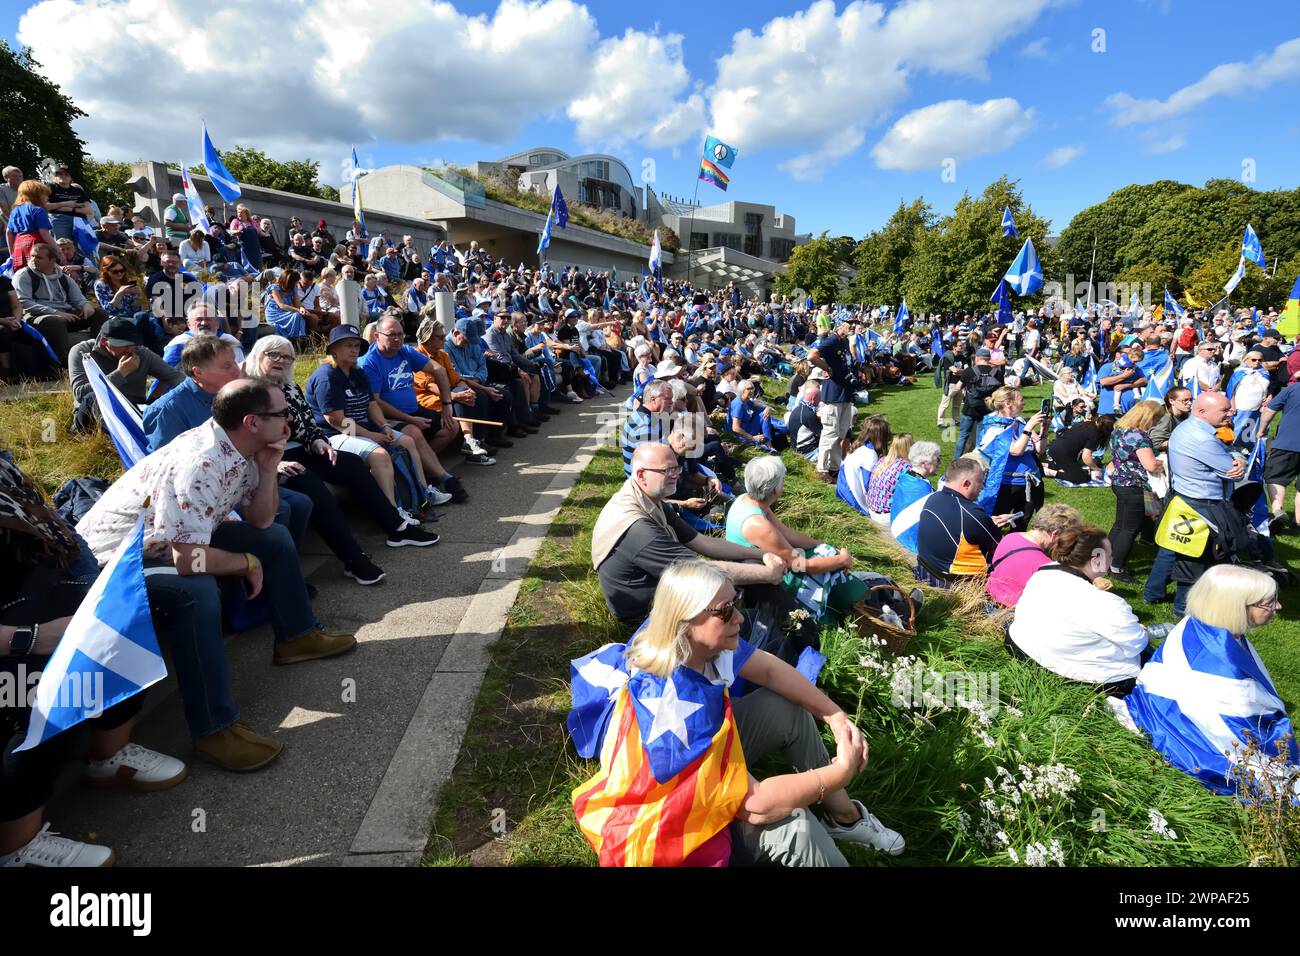 A large Scottish crowd sitting in the sun at Holyrood parliament Edinburgh, after a  peaceful 'Believe in Scotland' march for independence.. Stock Photo